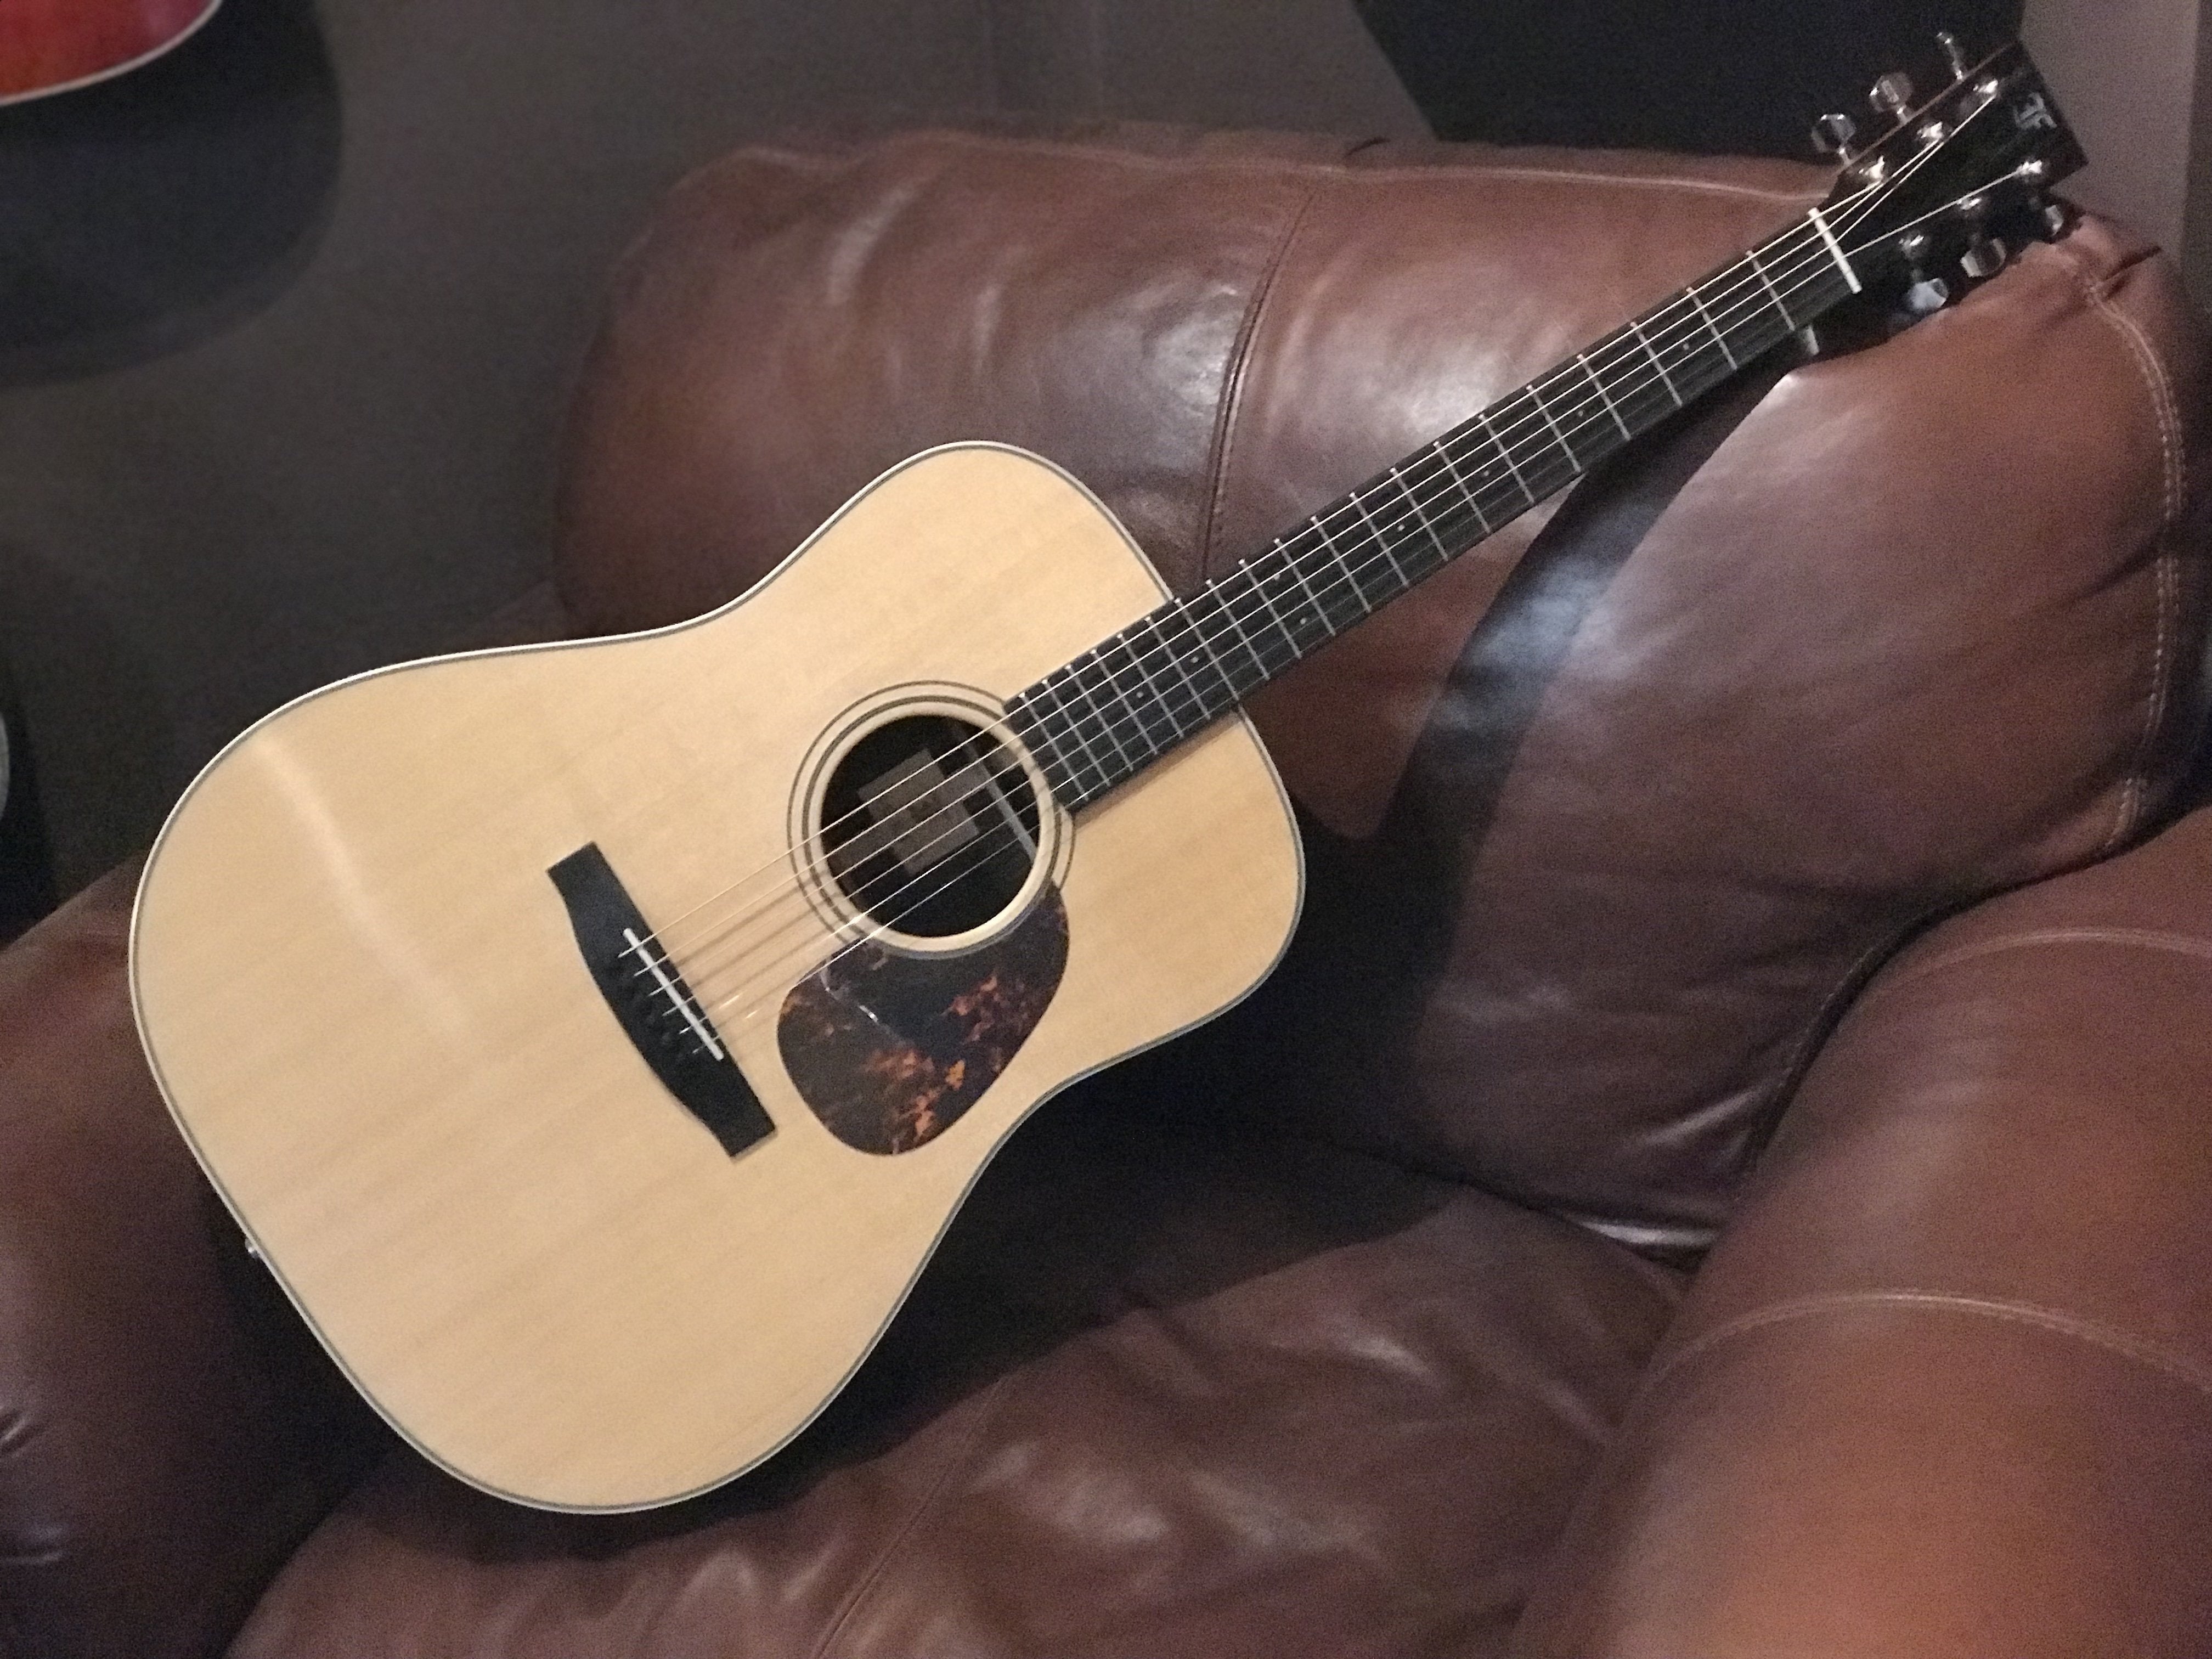 Furch Vintage 1 Series Dreadnought, Acoustic Guitar for sale at Richards Guitars.